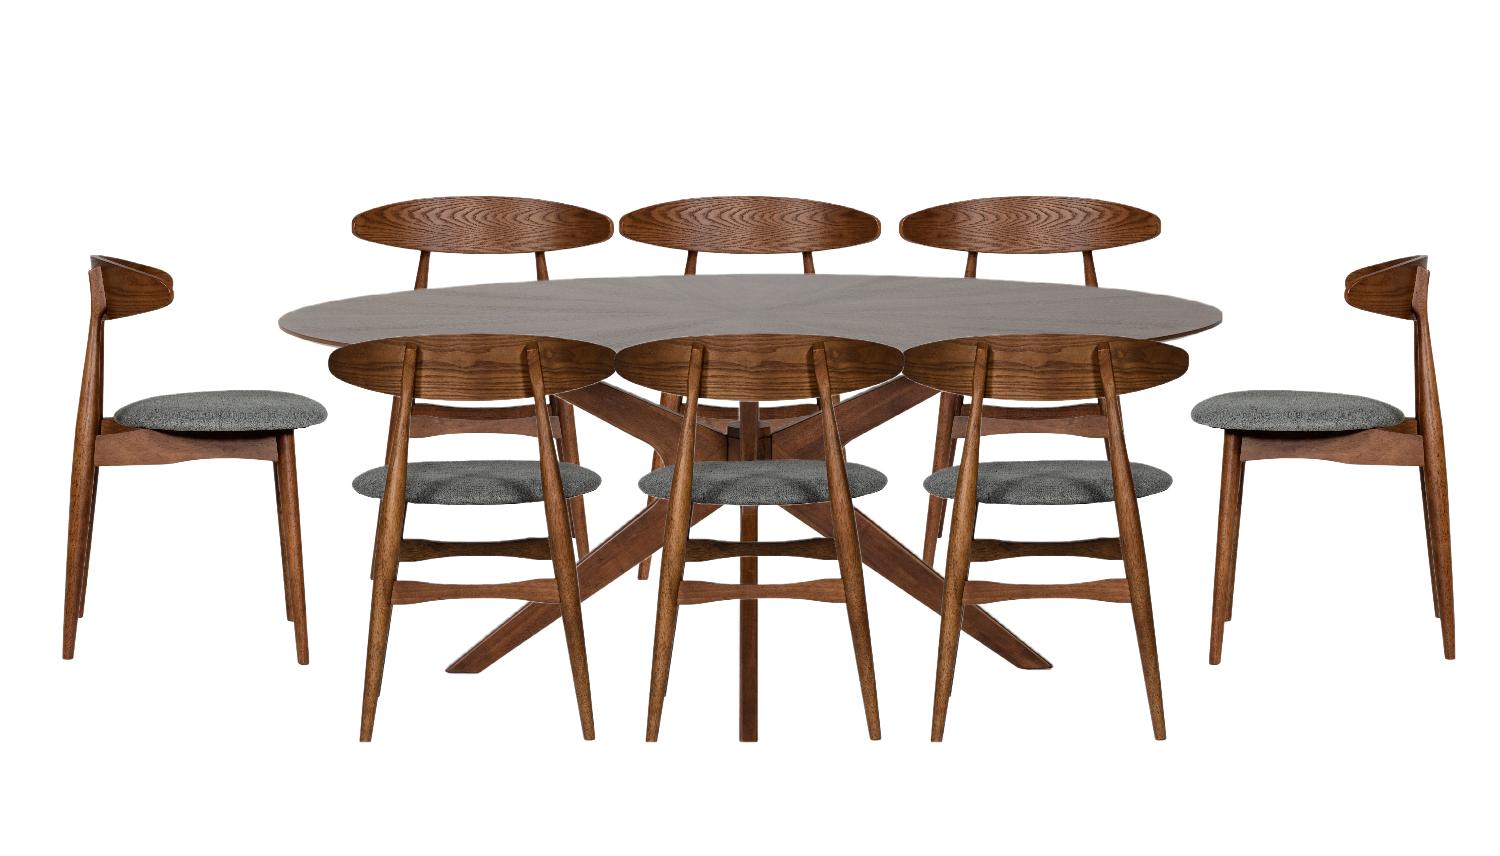 Contemporary, Modern Dining Room Set Prospect VGMAMIT-5276-1-9pcs in Walnut Fabric